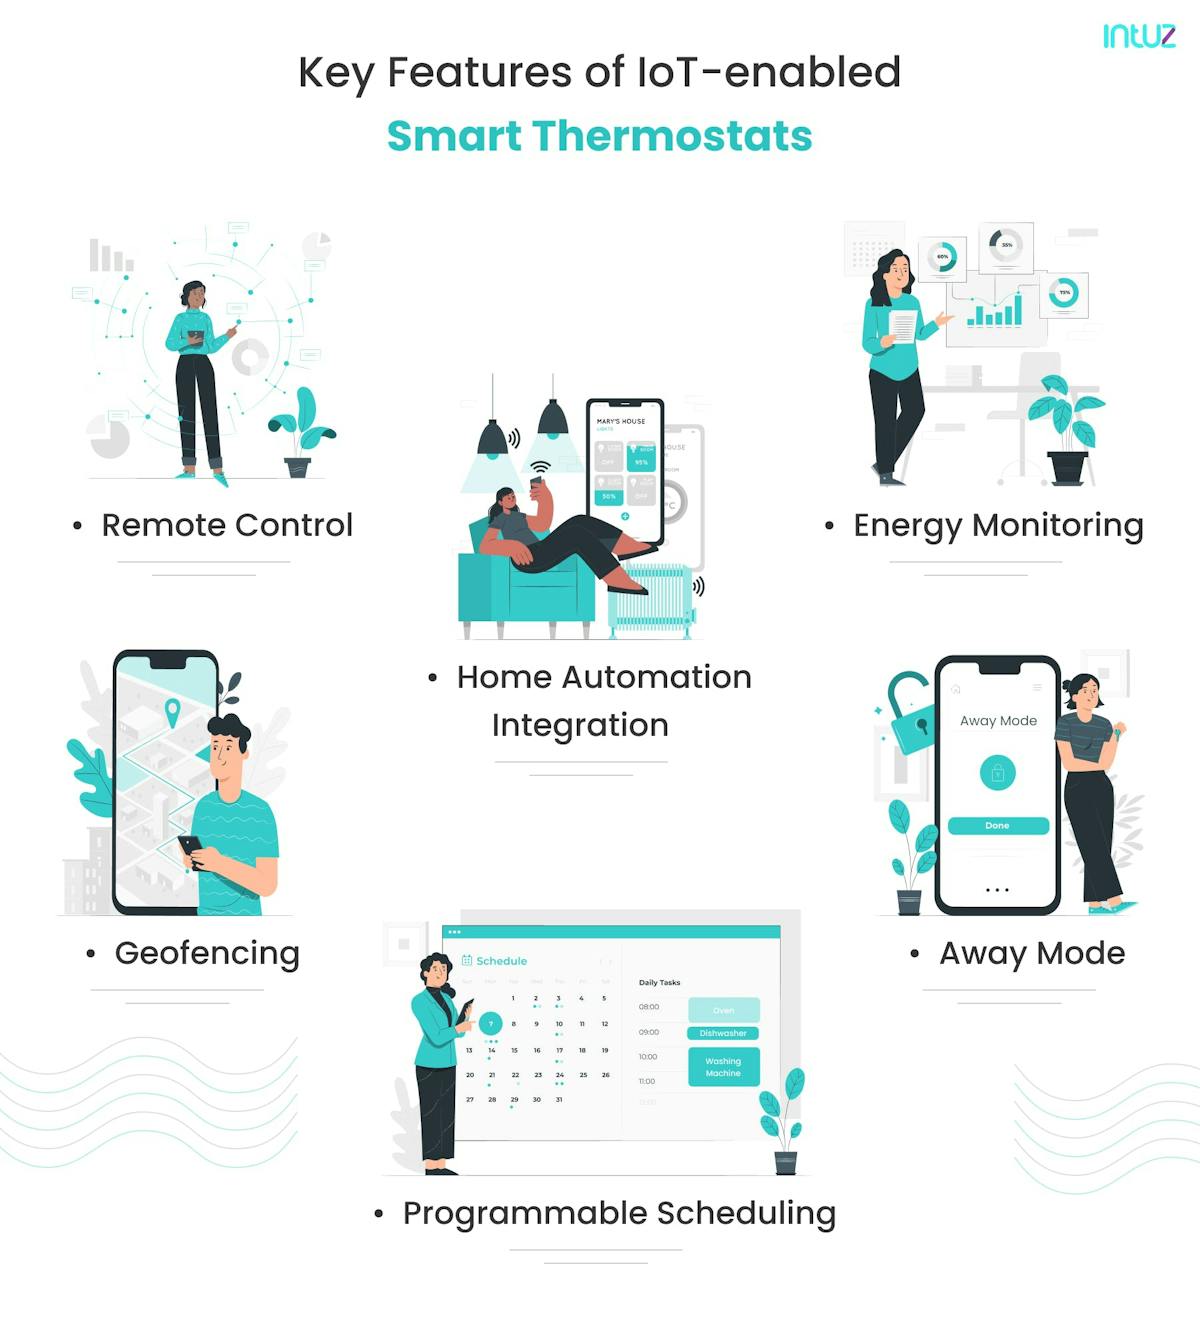 Key Features of IoT-enabled Smart Thermostats